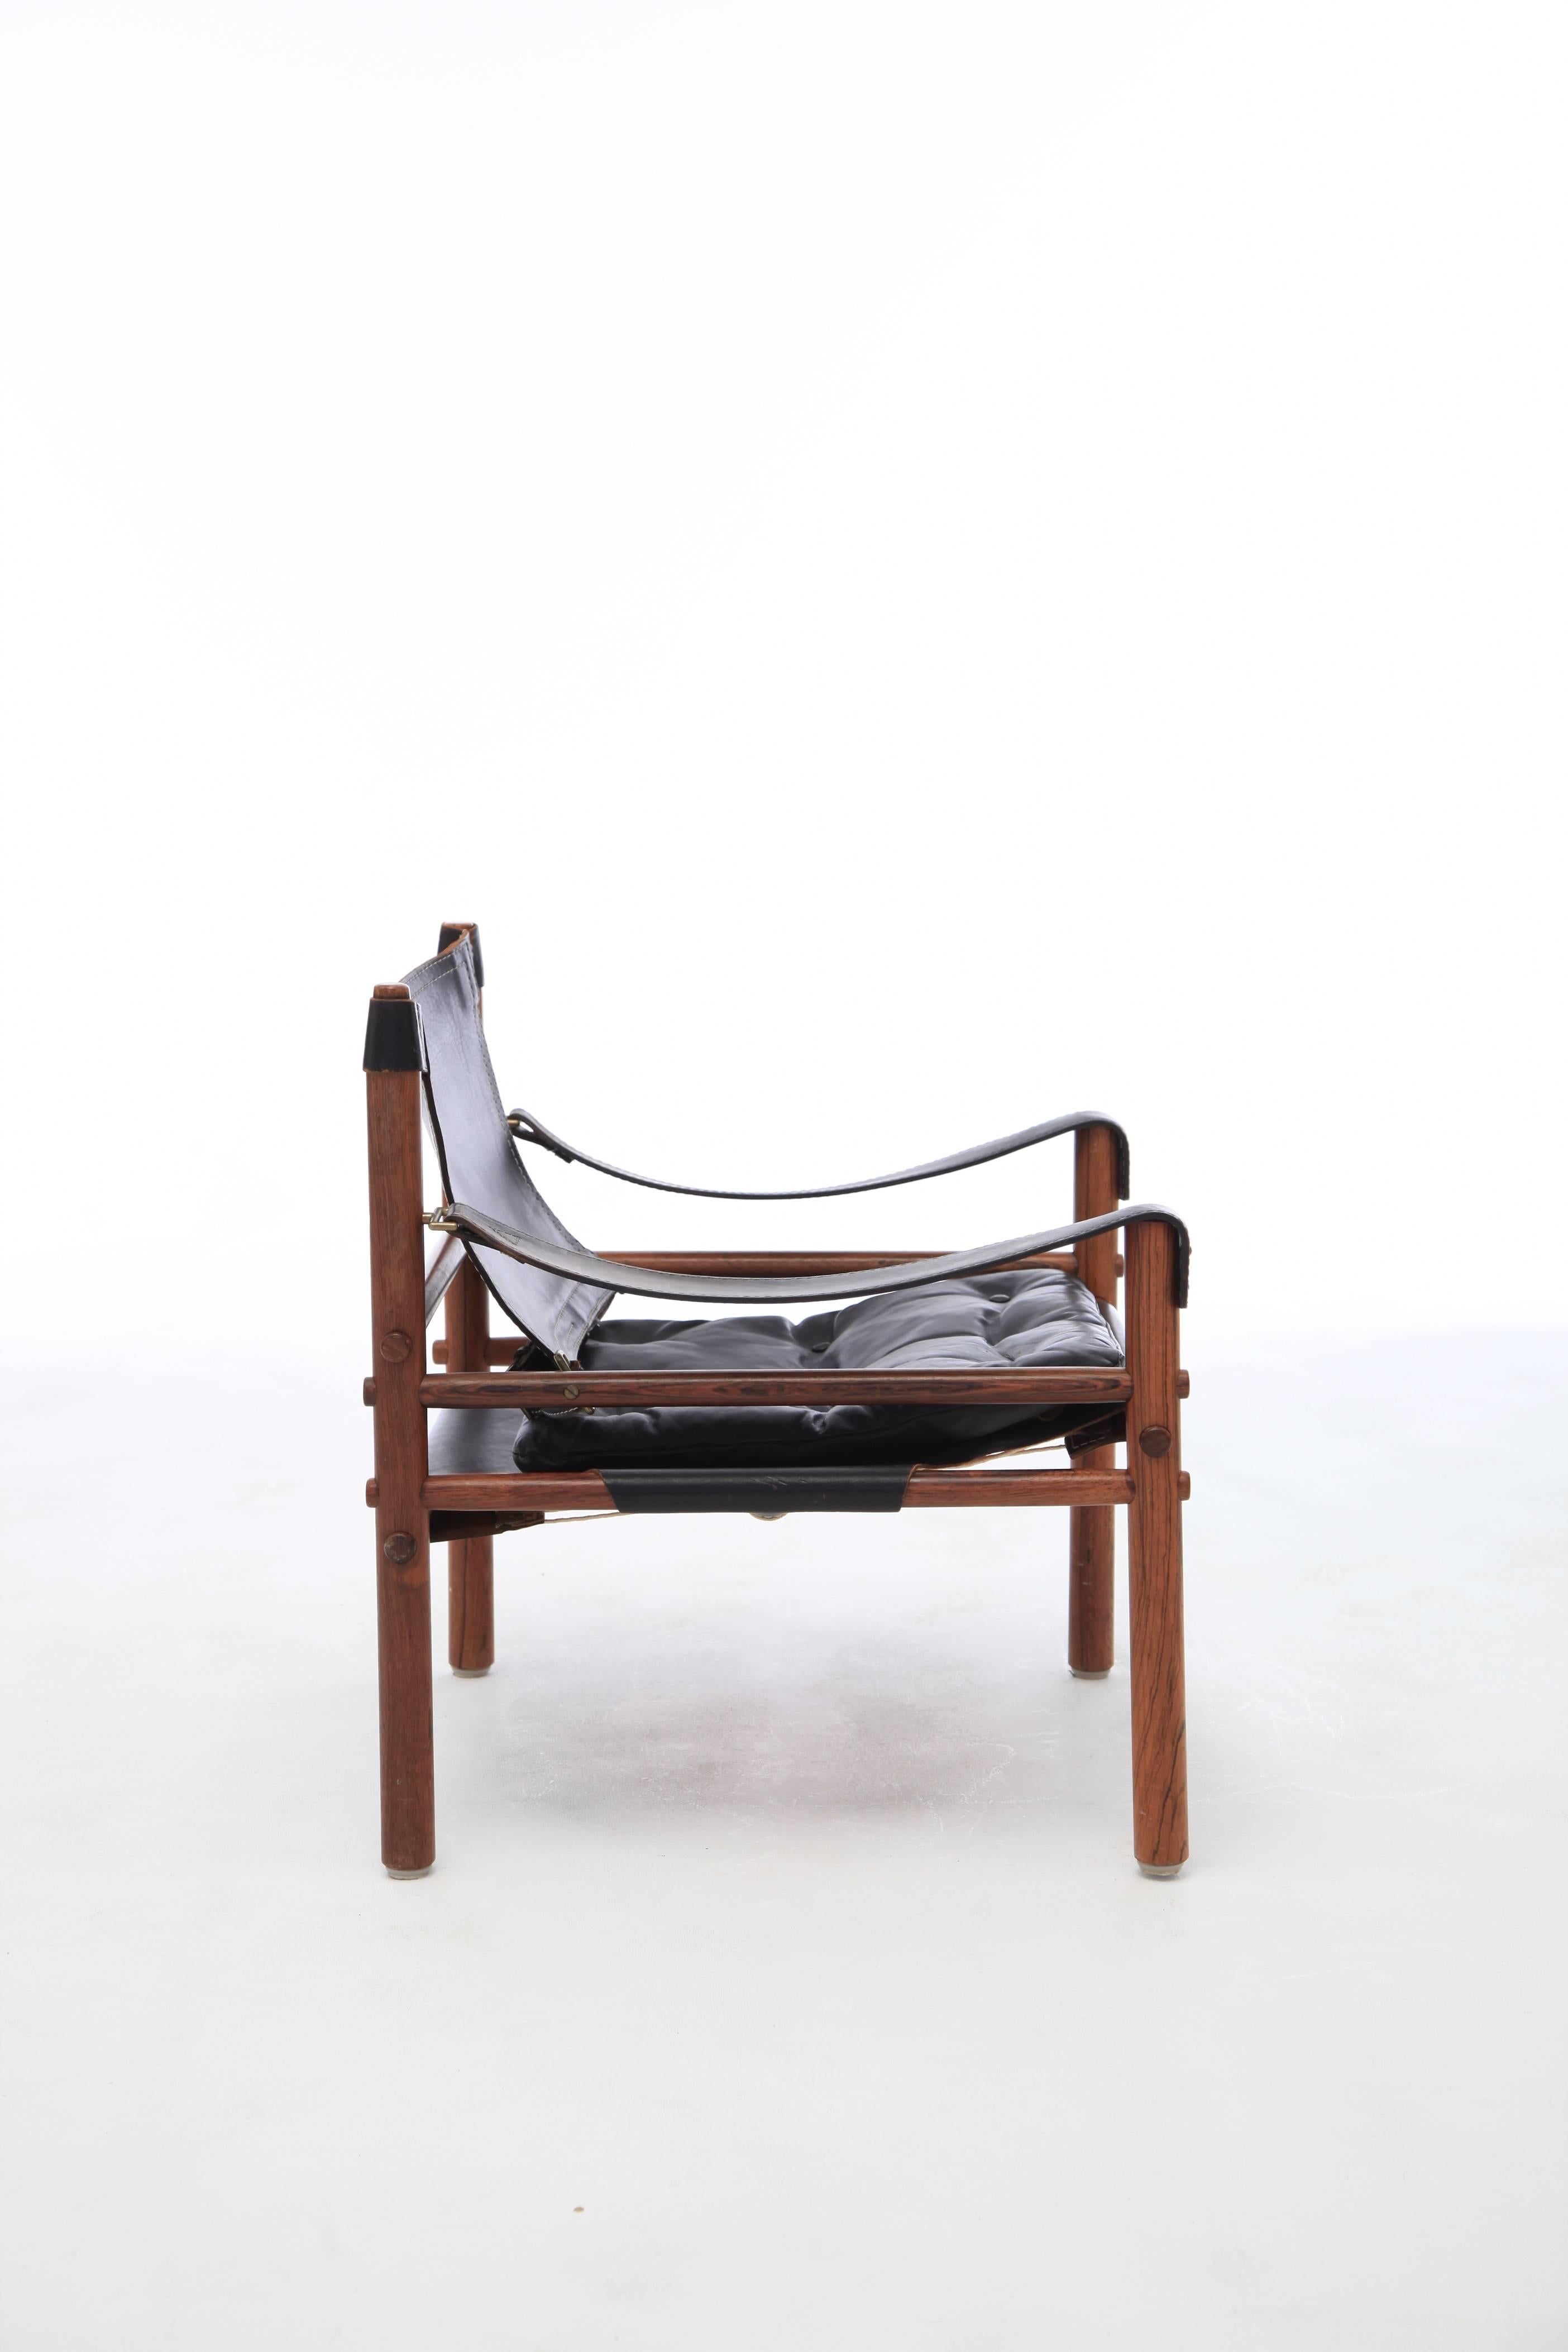 Scandinavian Modern Arne Norell Black Leather and Rosewood Safari Sirocco Chair, Sweden, 1960s